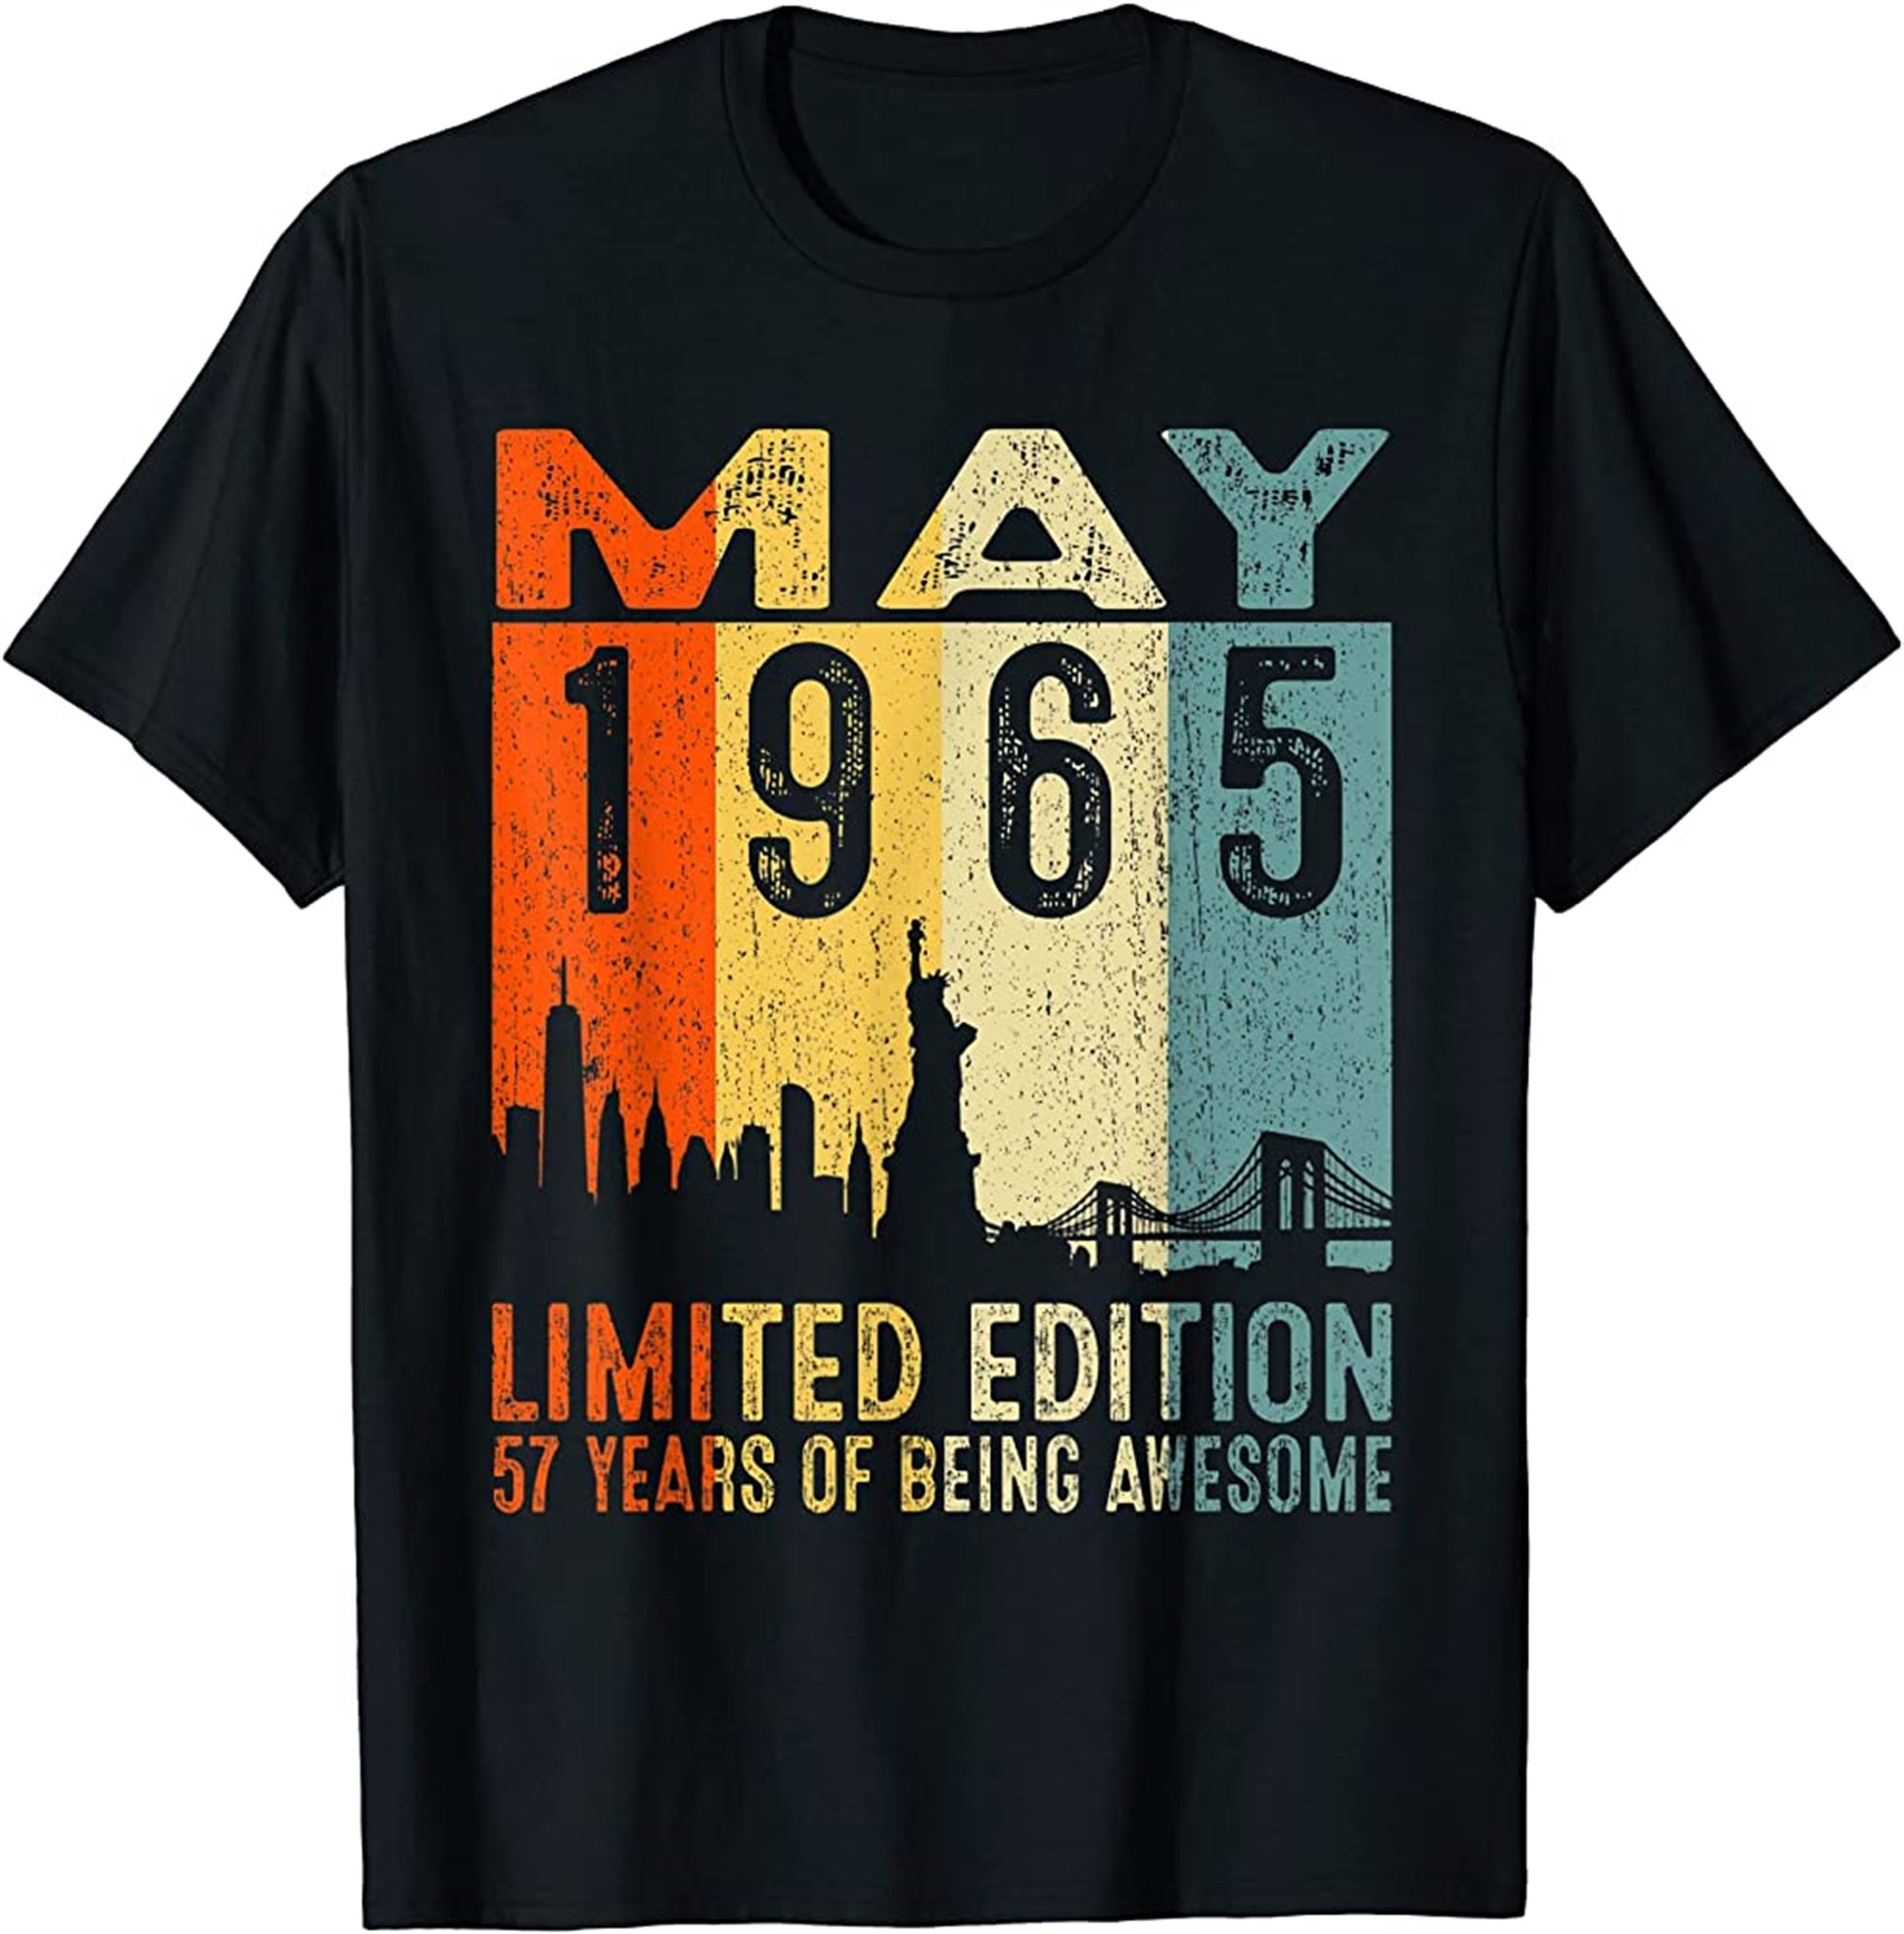 Vintage May 1965 Limited Edition 57th Birthday 57 Year Old T-shirt Full Size Up To 5xl